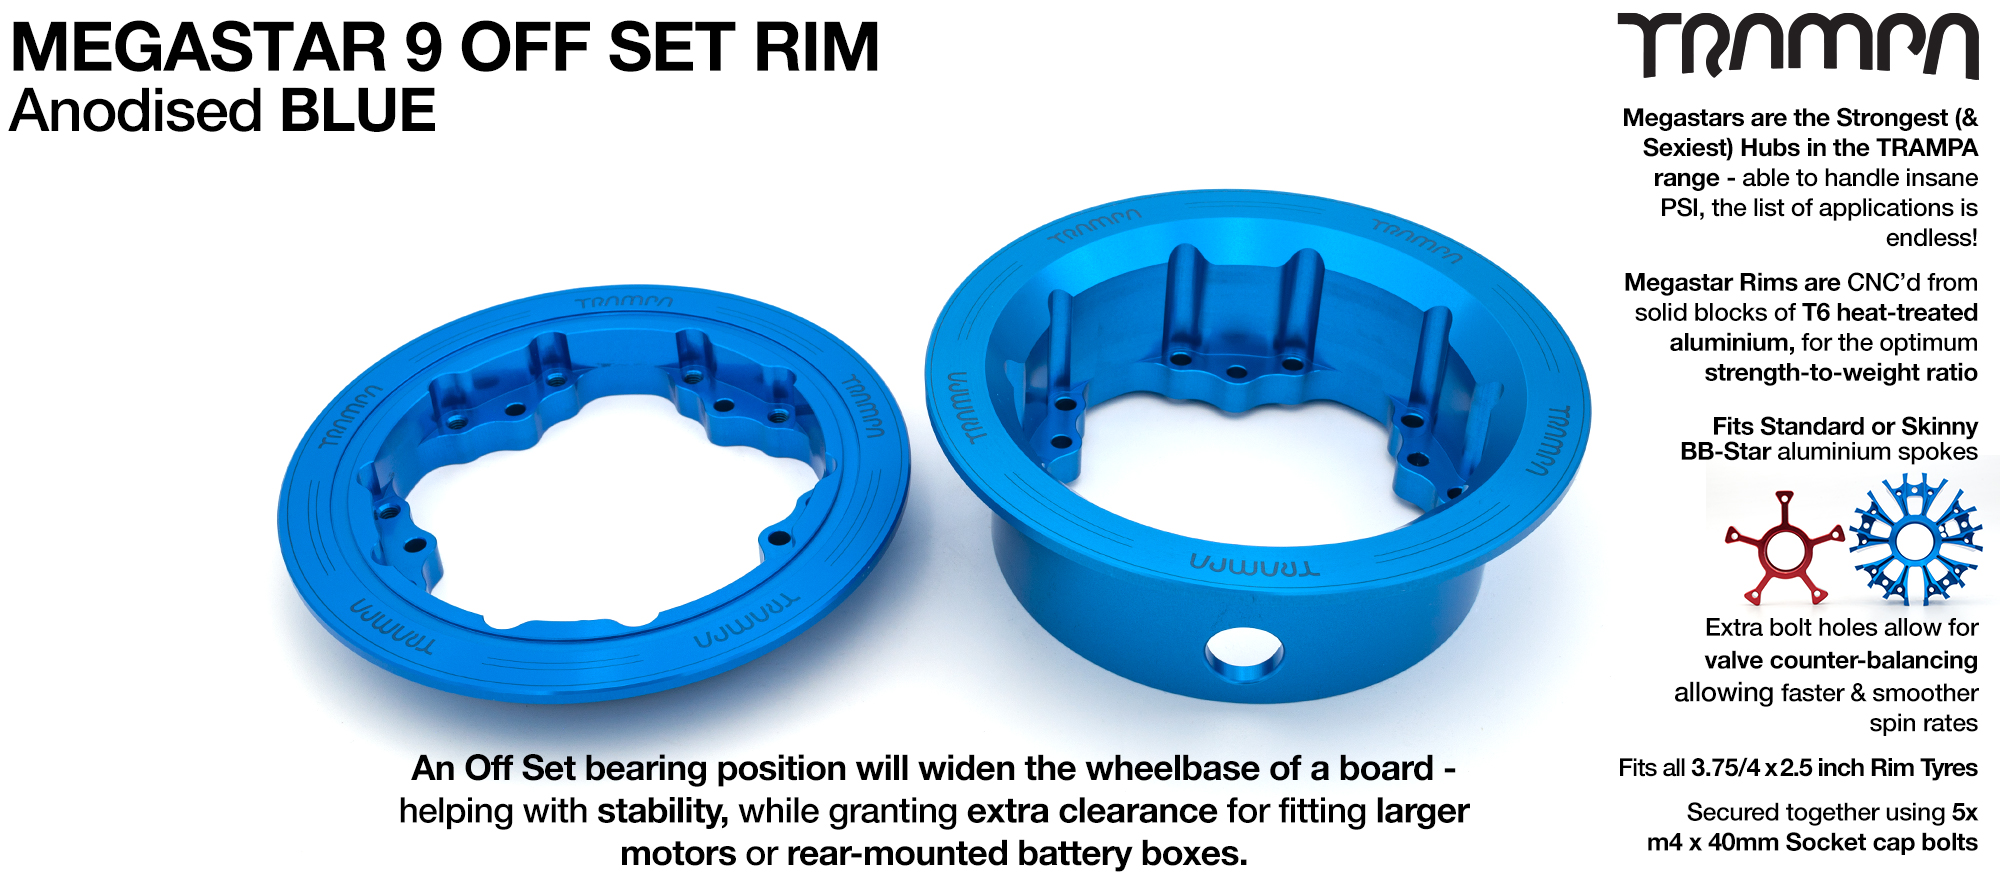 MEGASTAR 9 Rims Measure 3.75/4x 2.5 Inch & the bearings are positioned OFF-SET & accept 3.75 & 4 Inch Rim Tyres - BLUE